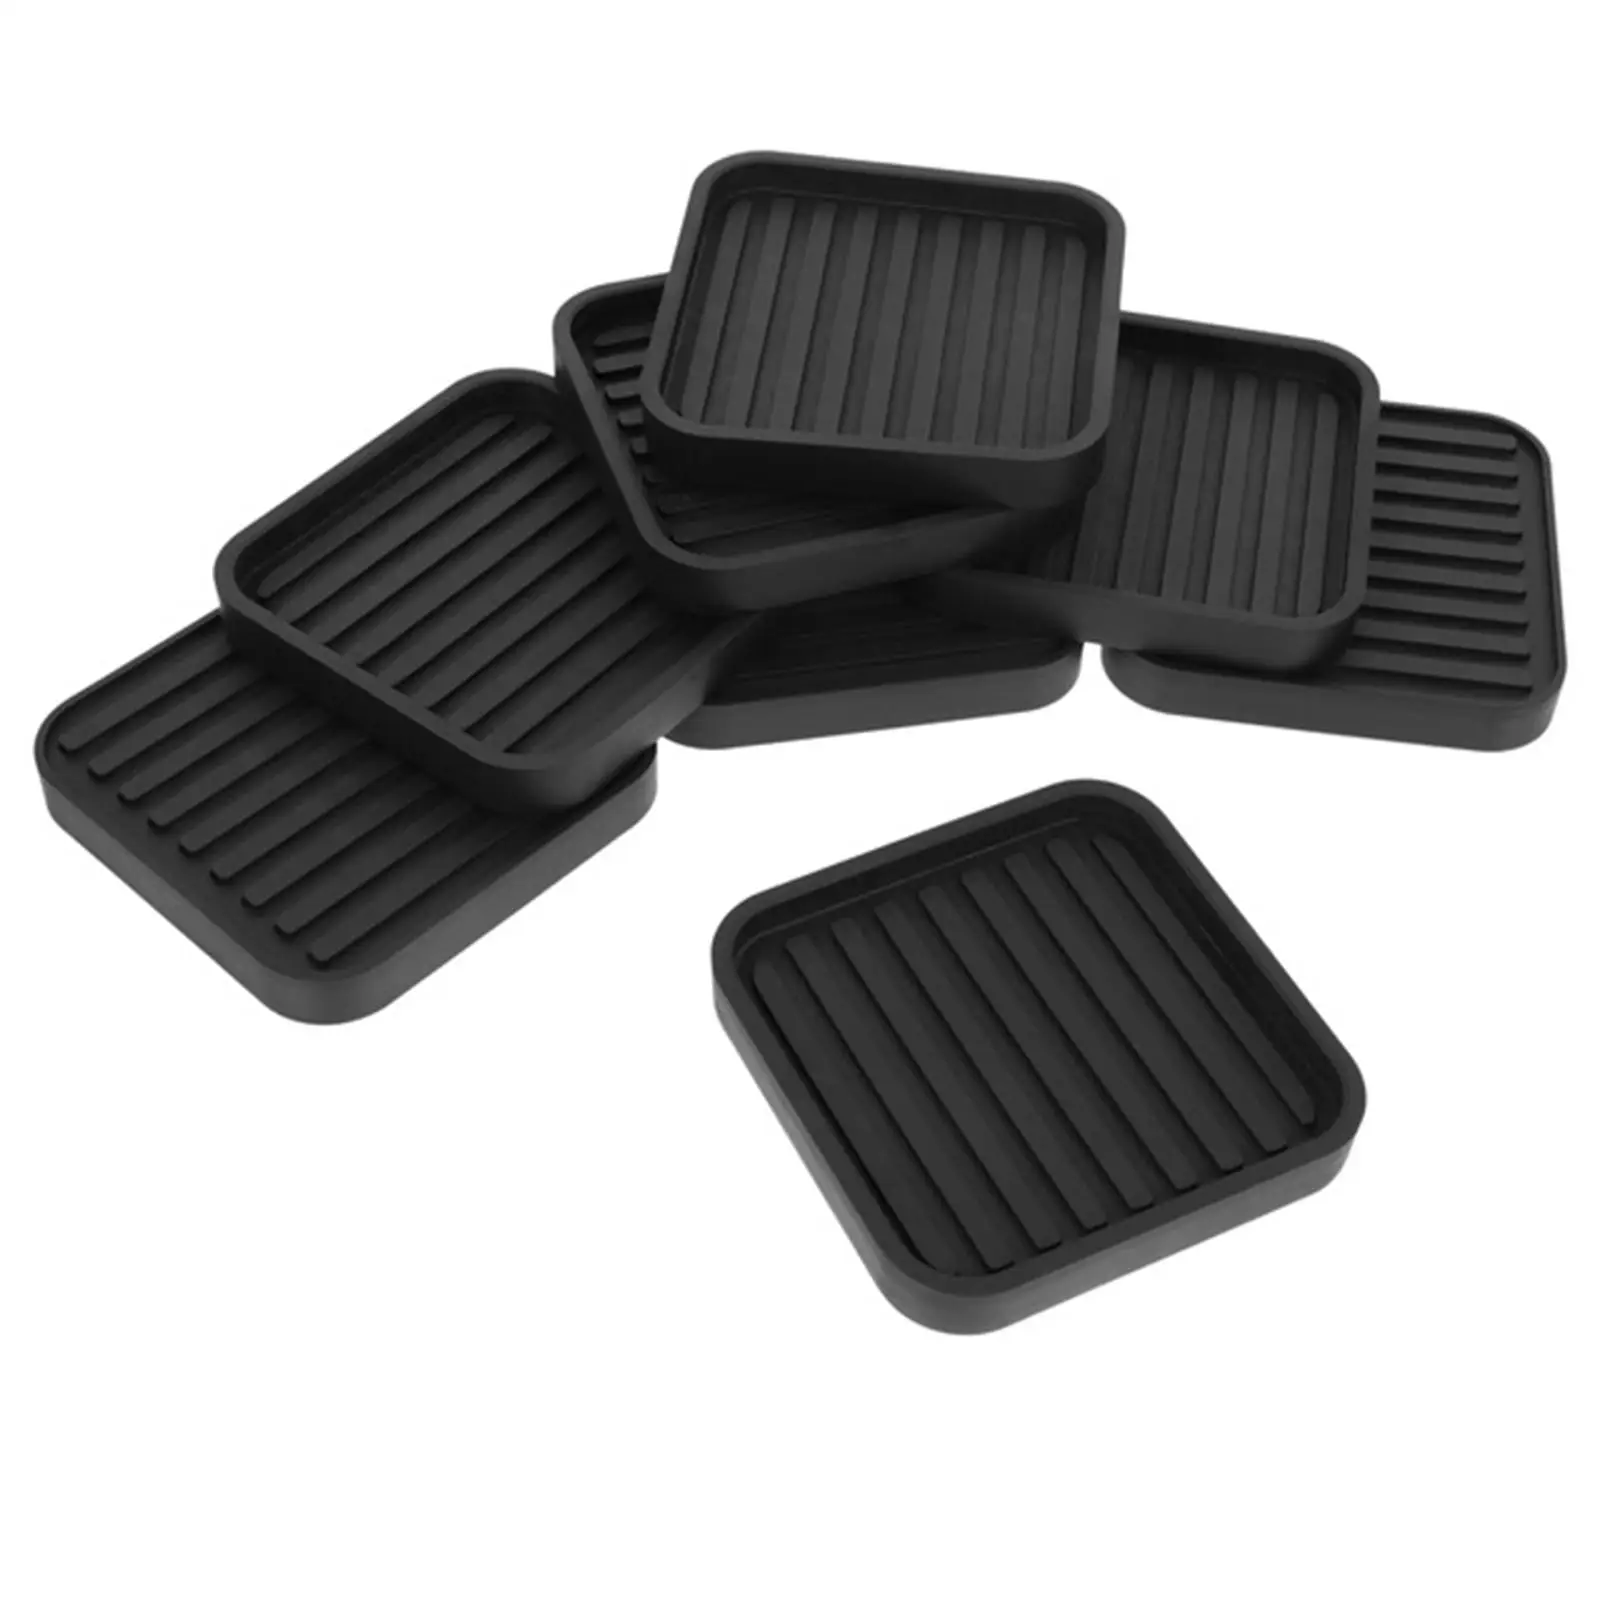 4x Square Rubber Furniture Caster Cups Non Slip Casters Furniture Wheel Stoppers Rubber feet for Chairs Carpet Sofas